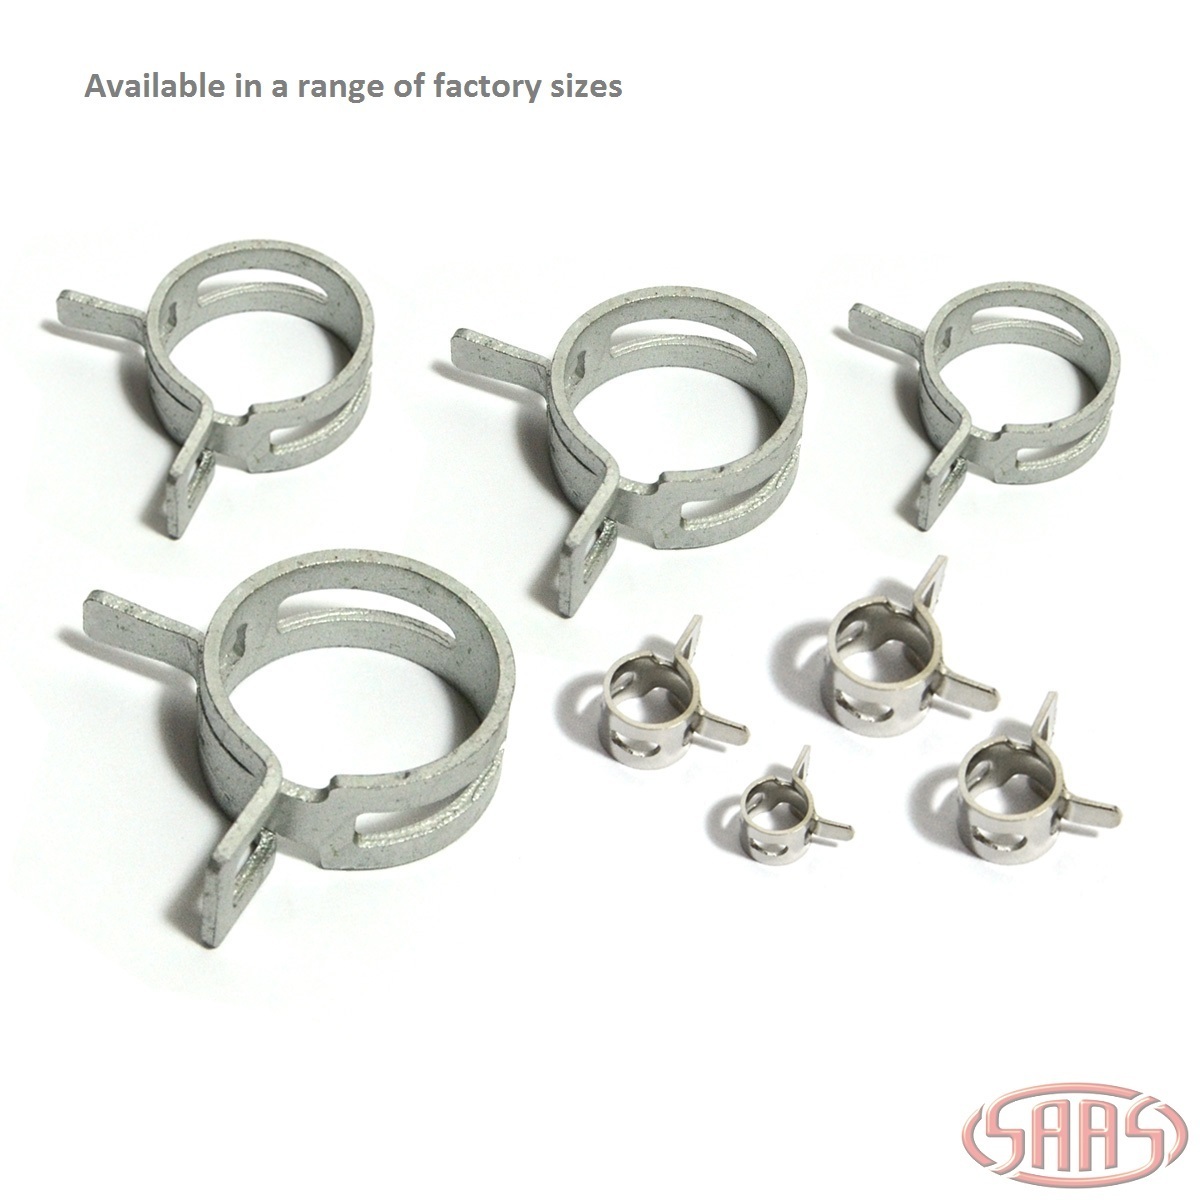 Hose Clamps Spring Size 5 suit 5mm (13/64") hose Pack of 6